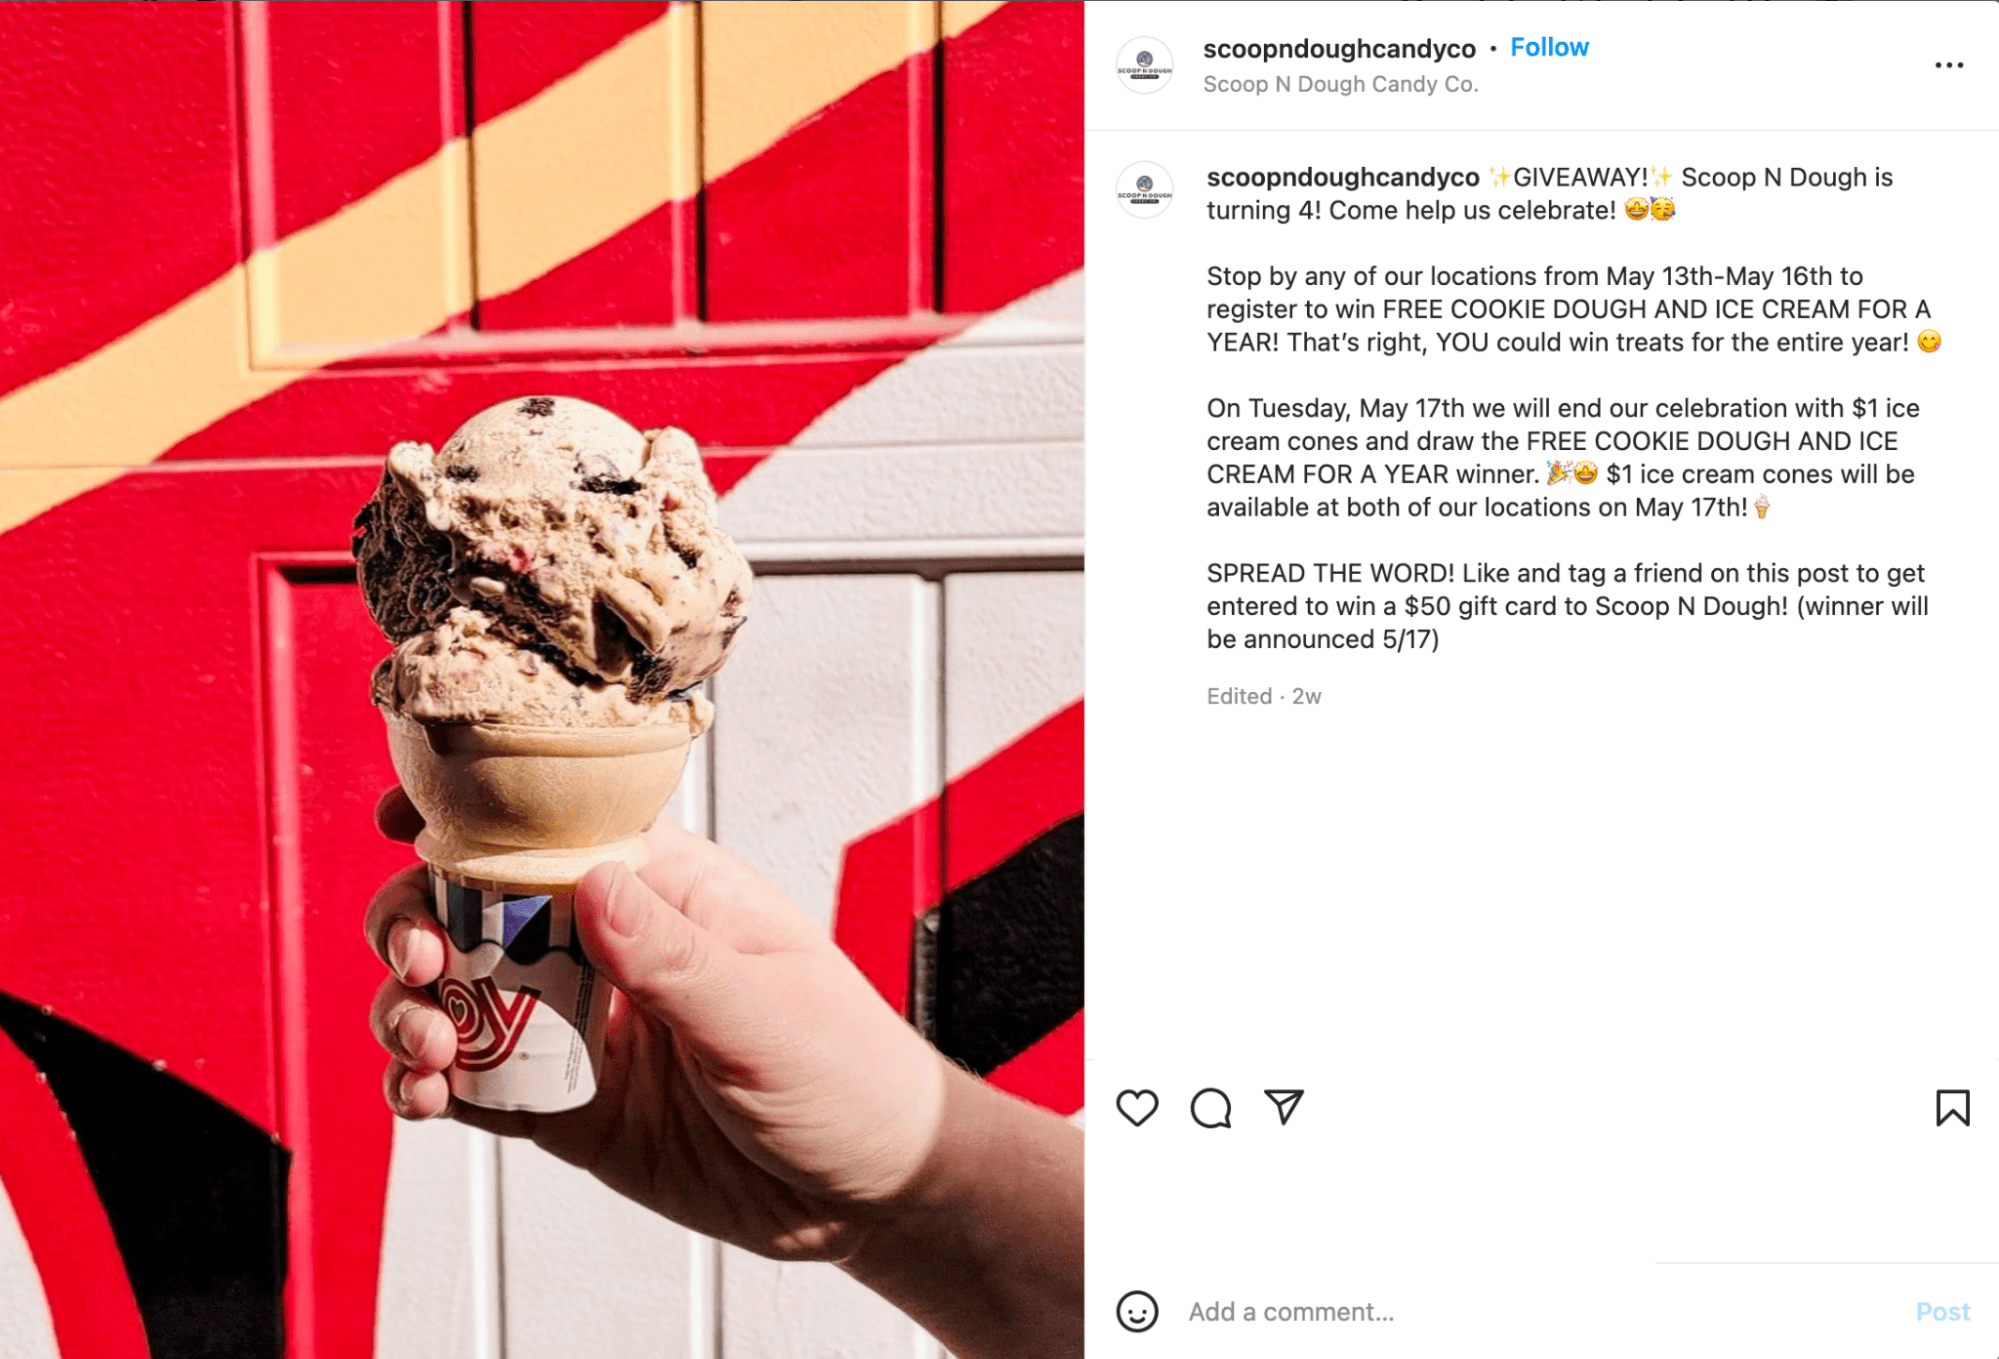 Example of a Instagram giveaway from Scoop N Dough Candy Co.